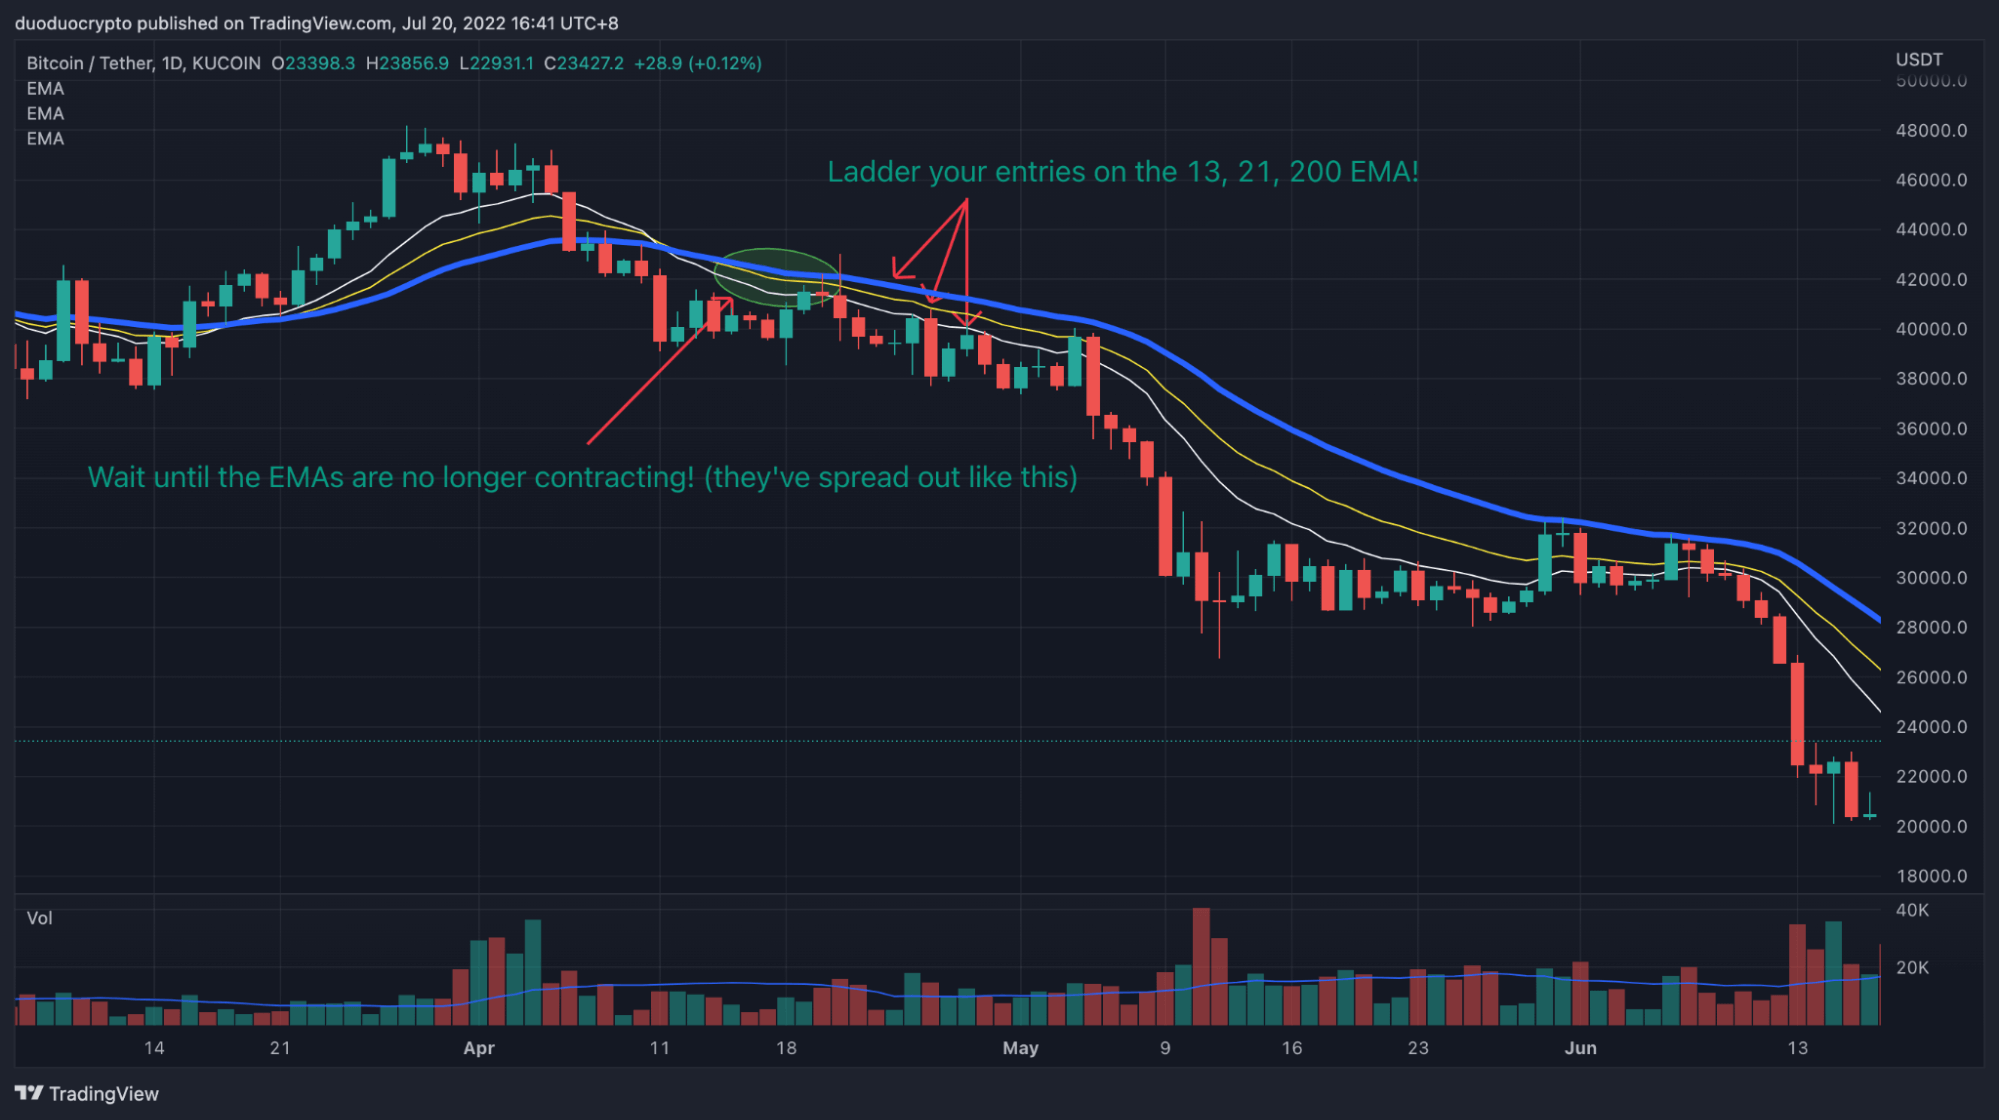 200 EMA is the strongest support